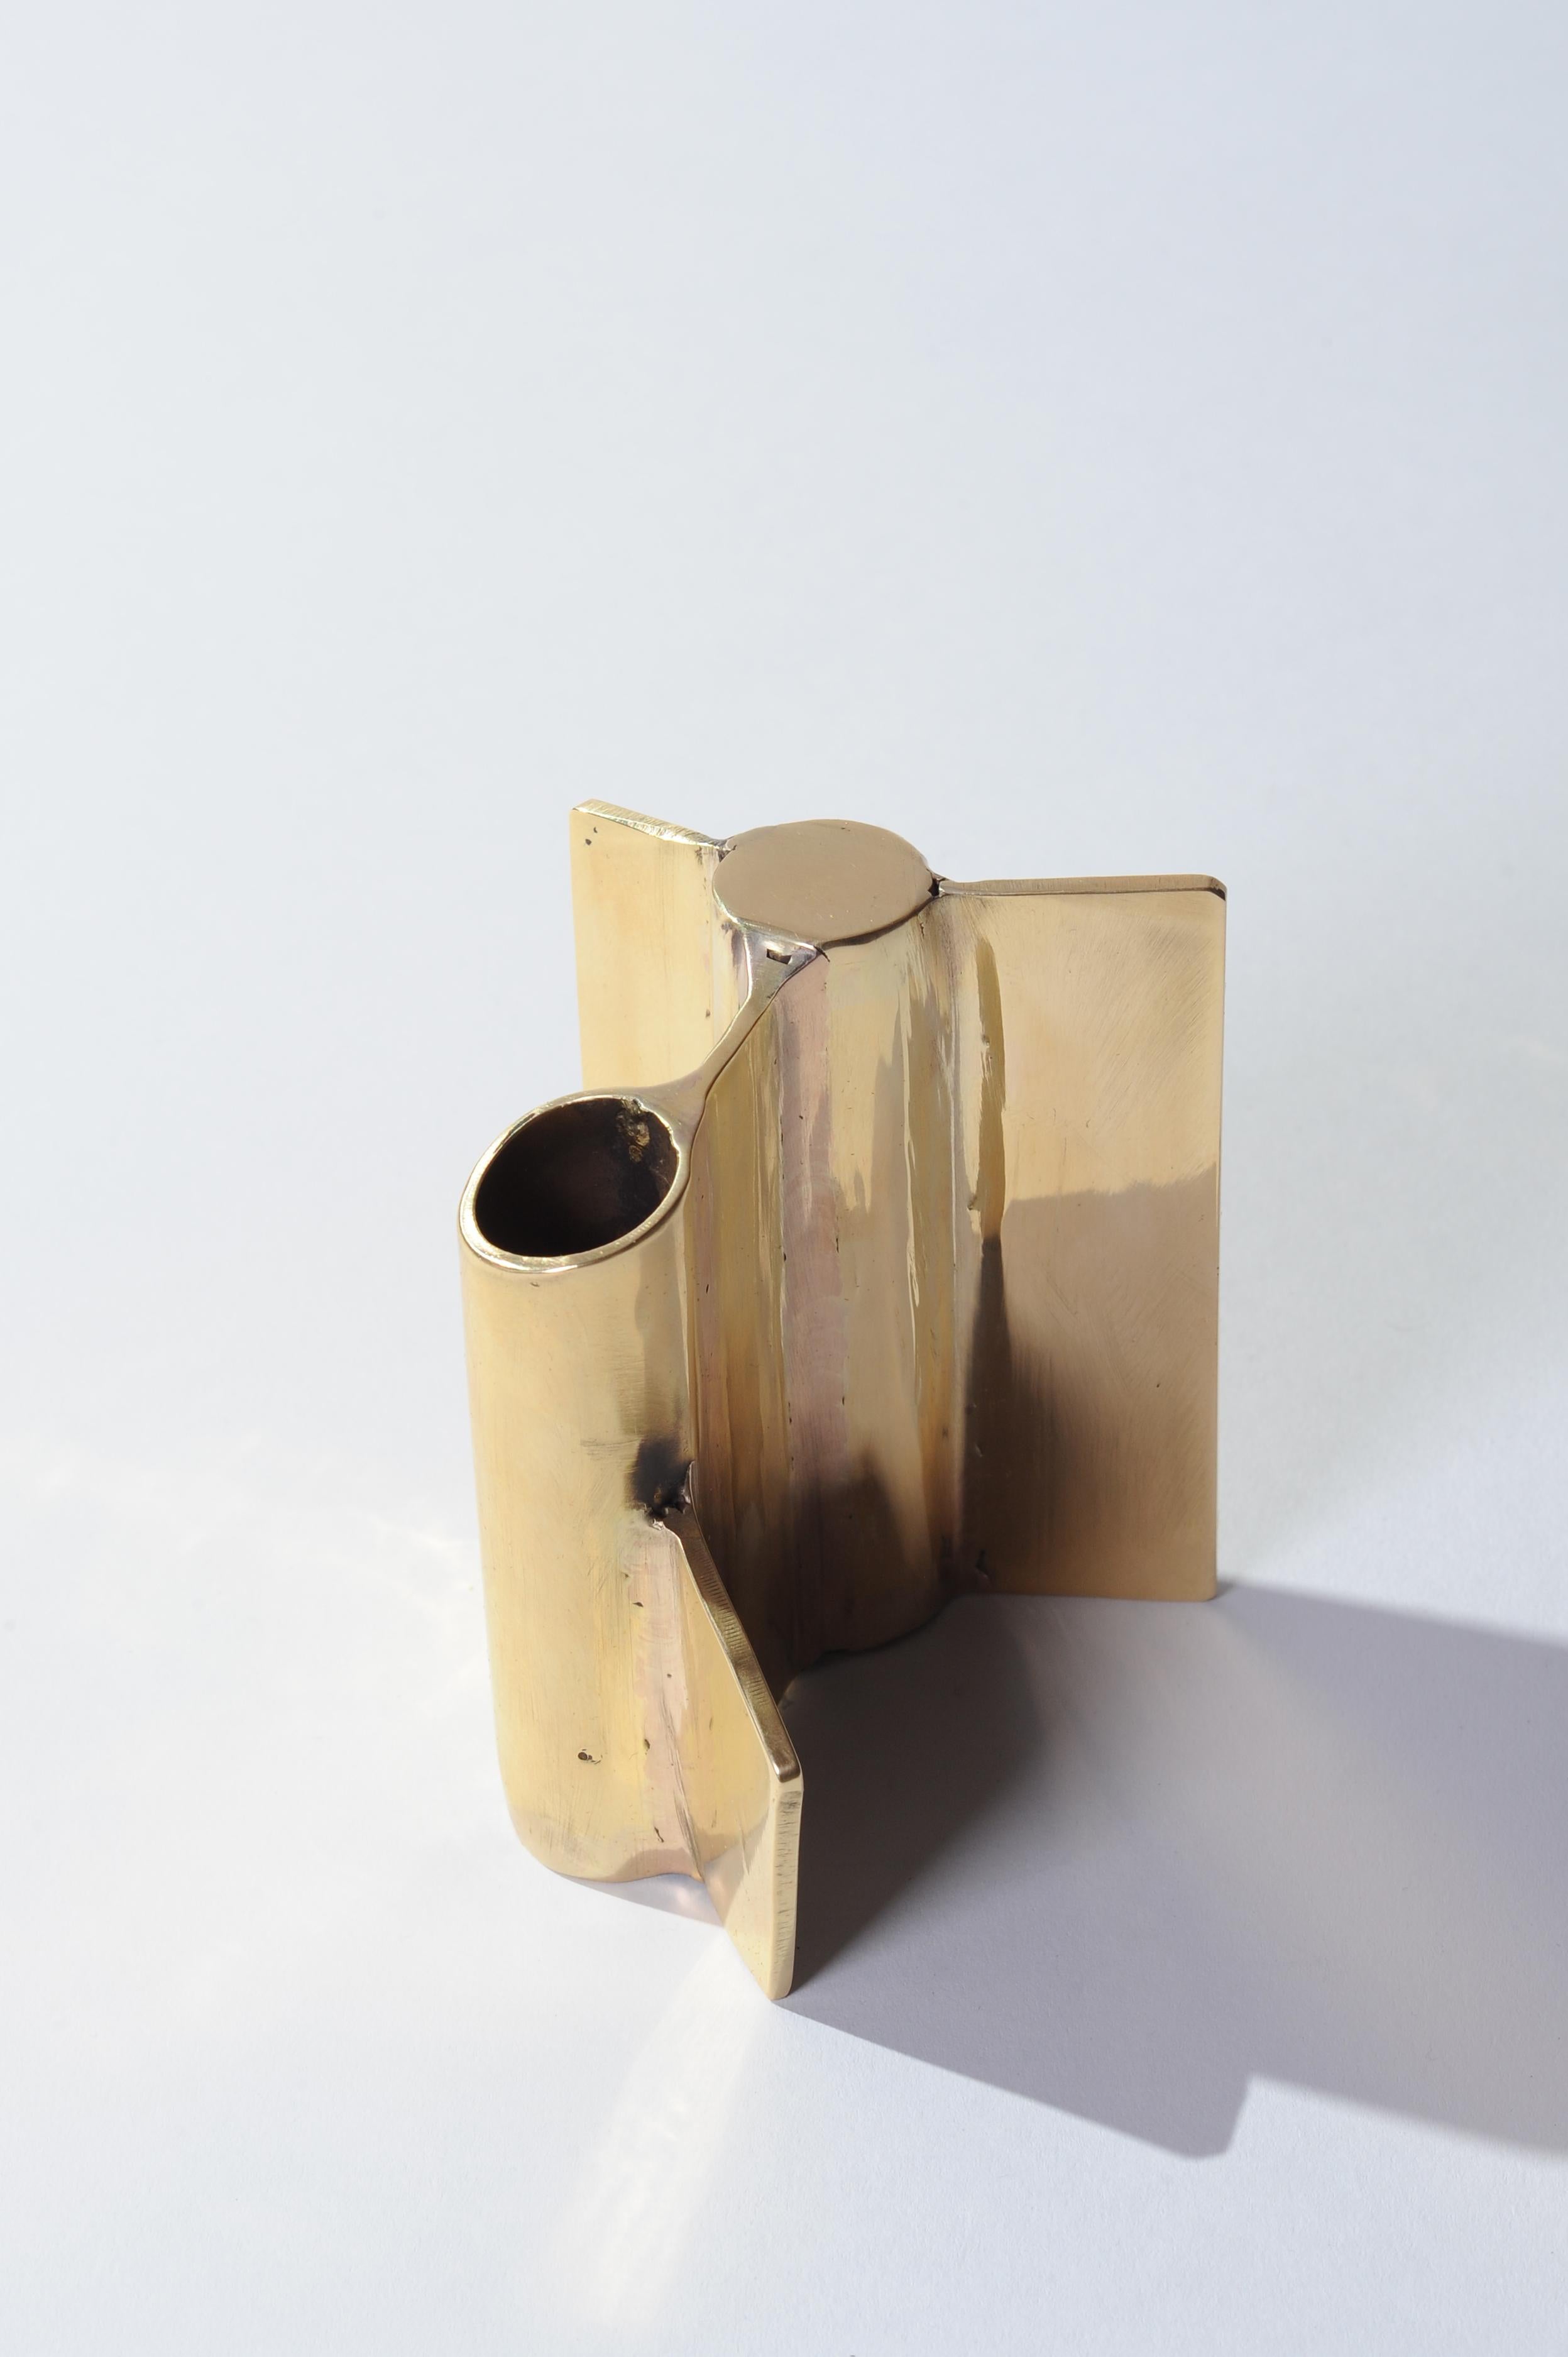 Unique brass vase, hand-sculpted and signed by Lukasz Friedrich
Brass vase 02, 2020
Patinated and polished brass
Dimensions:
H 10 cm
W 7.5 cm
D 10 cm
Signed and dated.